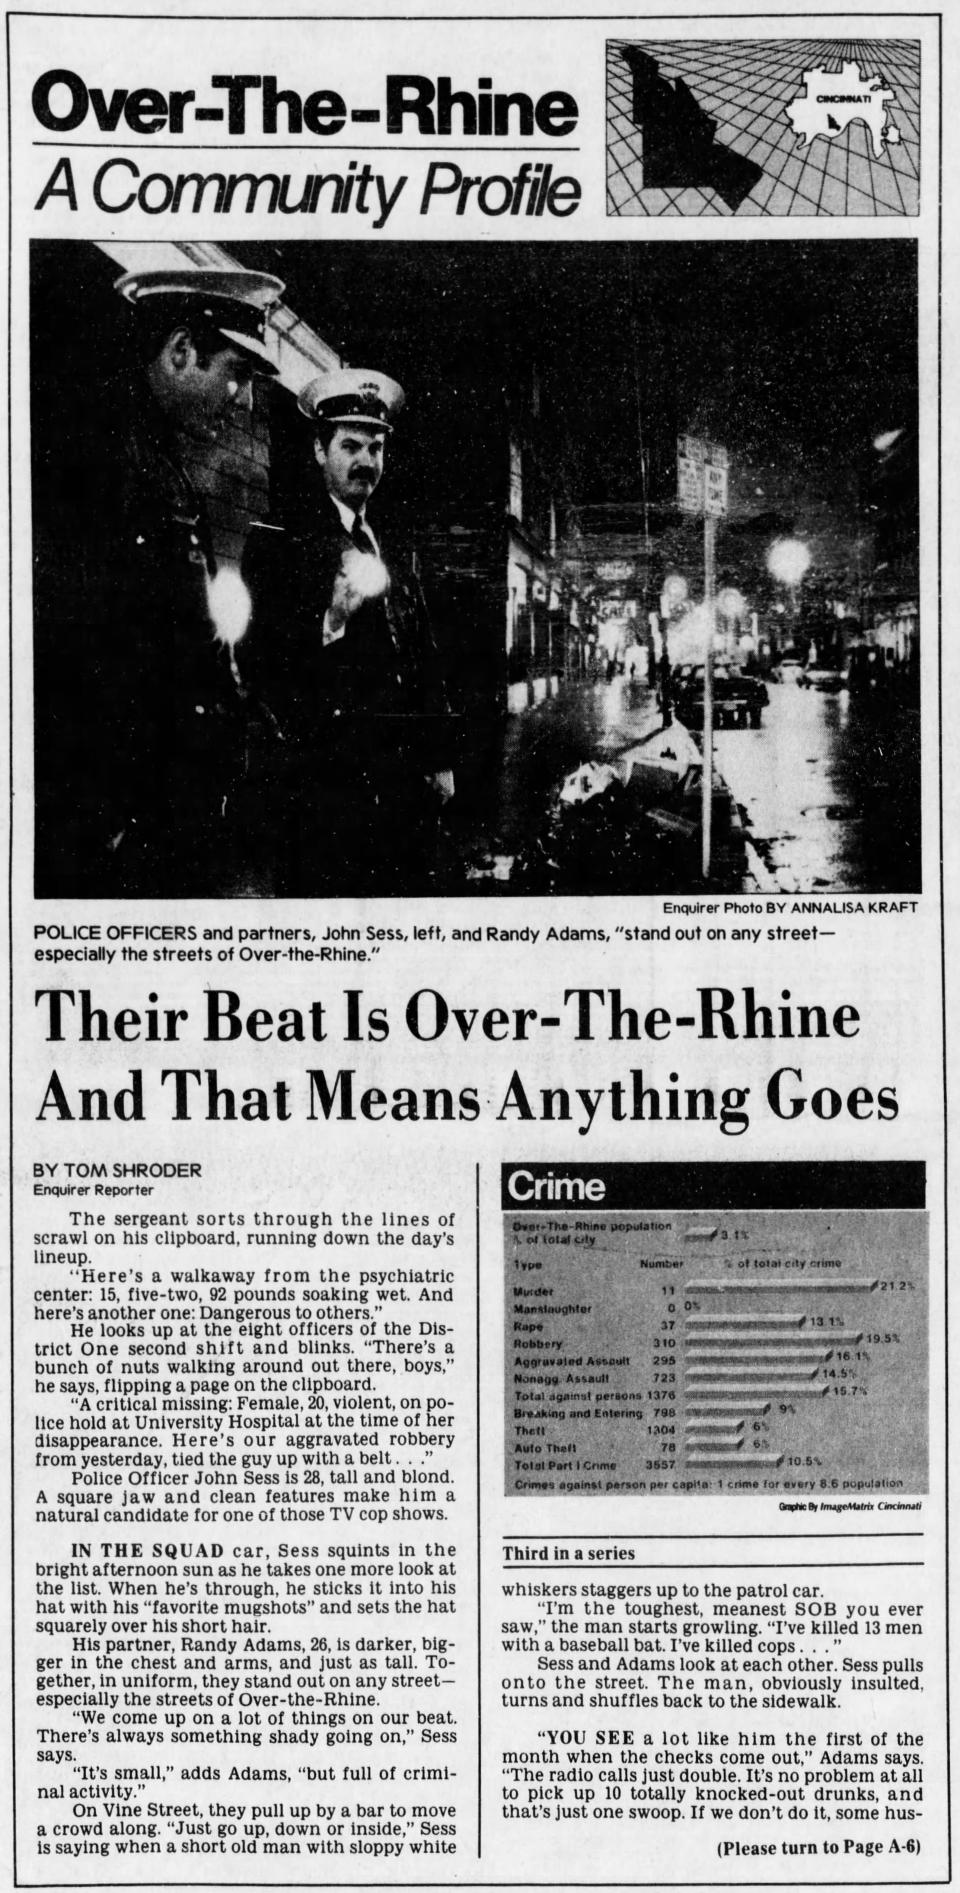 An article from The Cincinnati Enquirer, Dec. 20, 1983, shows the photograph of two Cincinnati police officers in Over-the-Rhine.